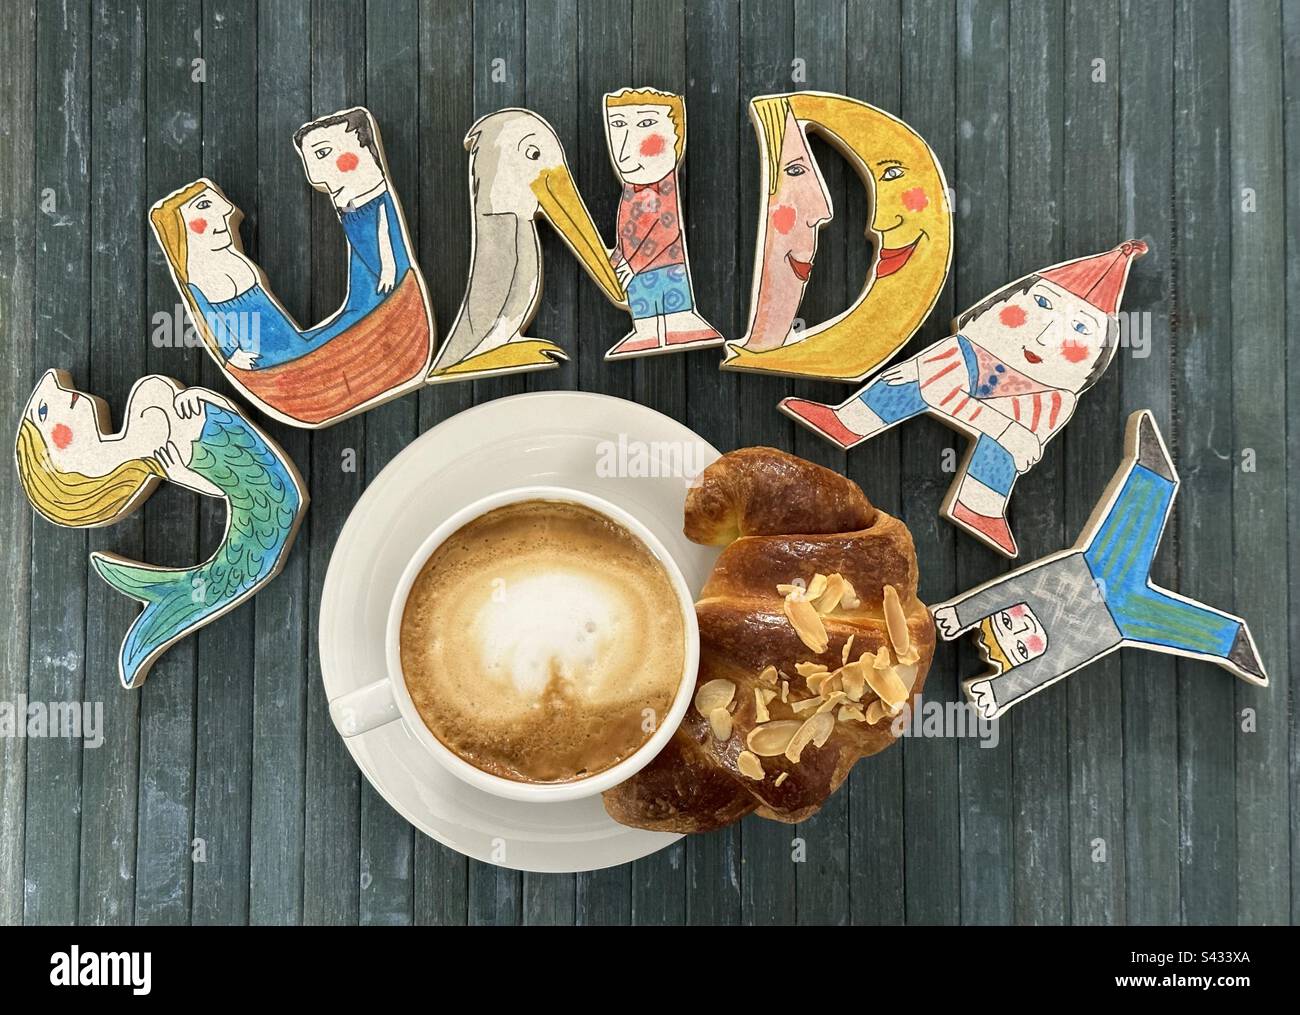 Sunday creative breakfast with hand painted funny wooden letters, cappuccino and croissant at the bar Stock Photo